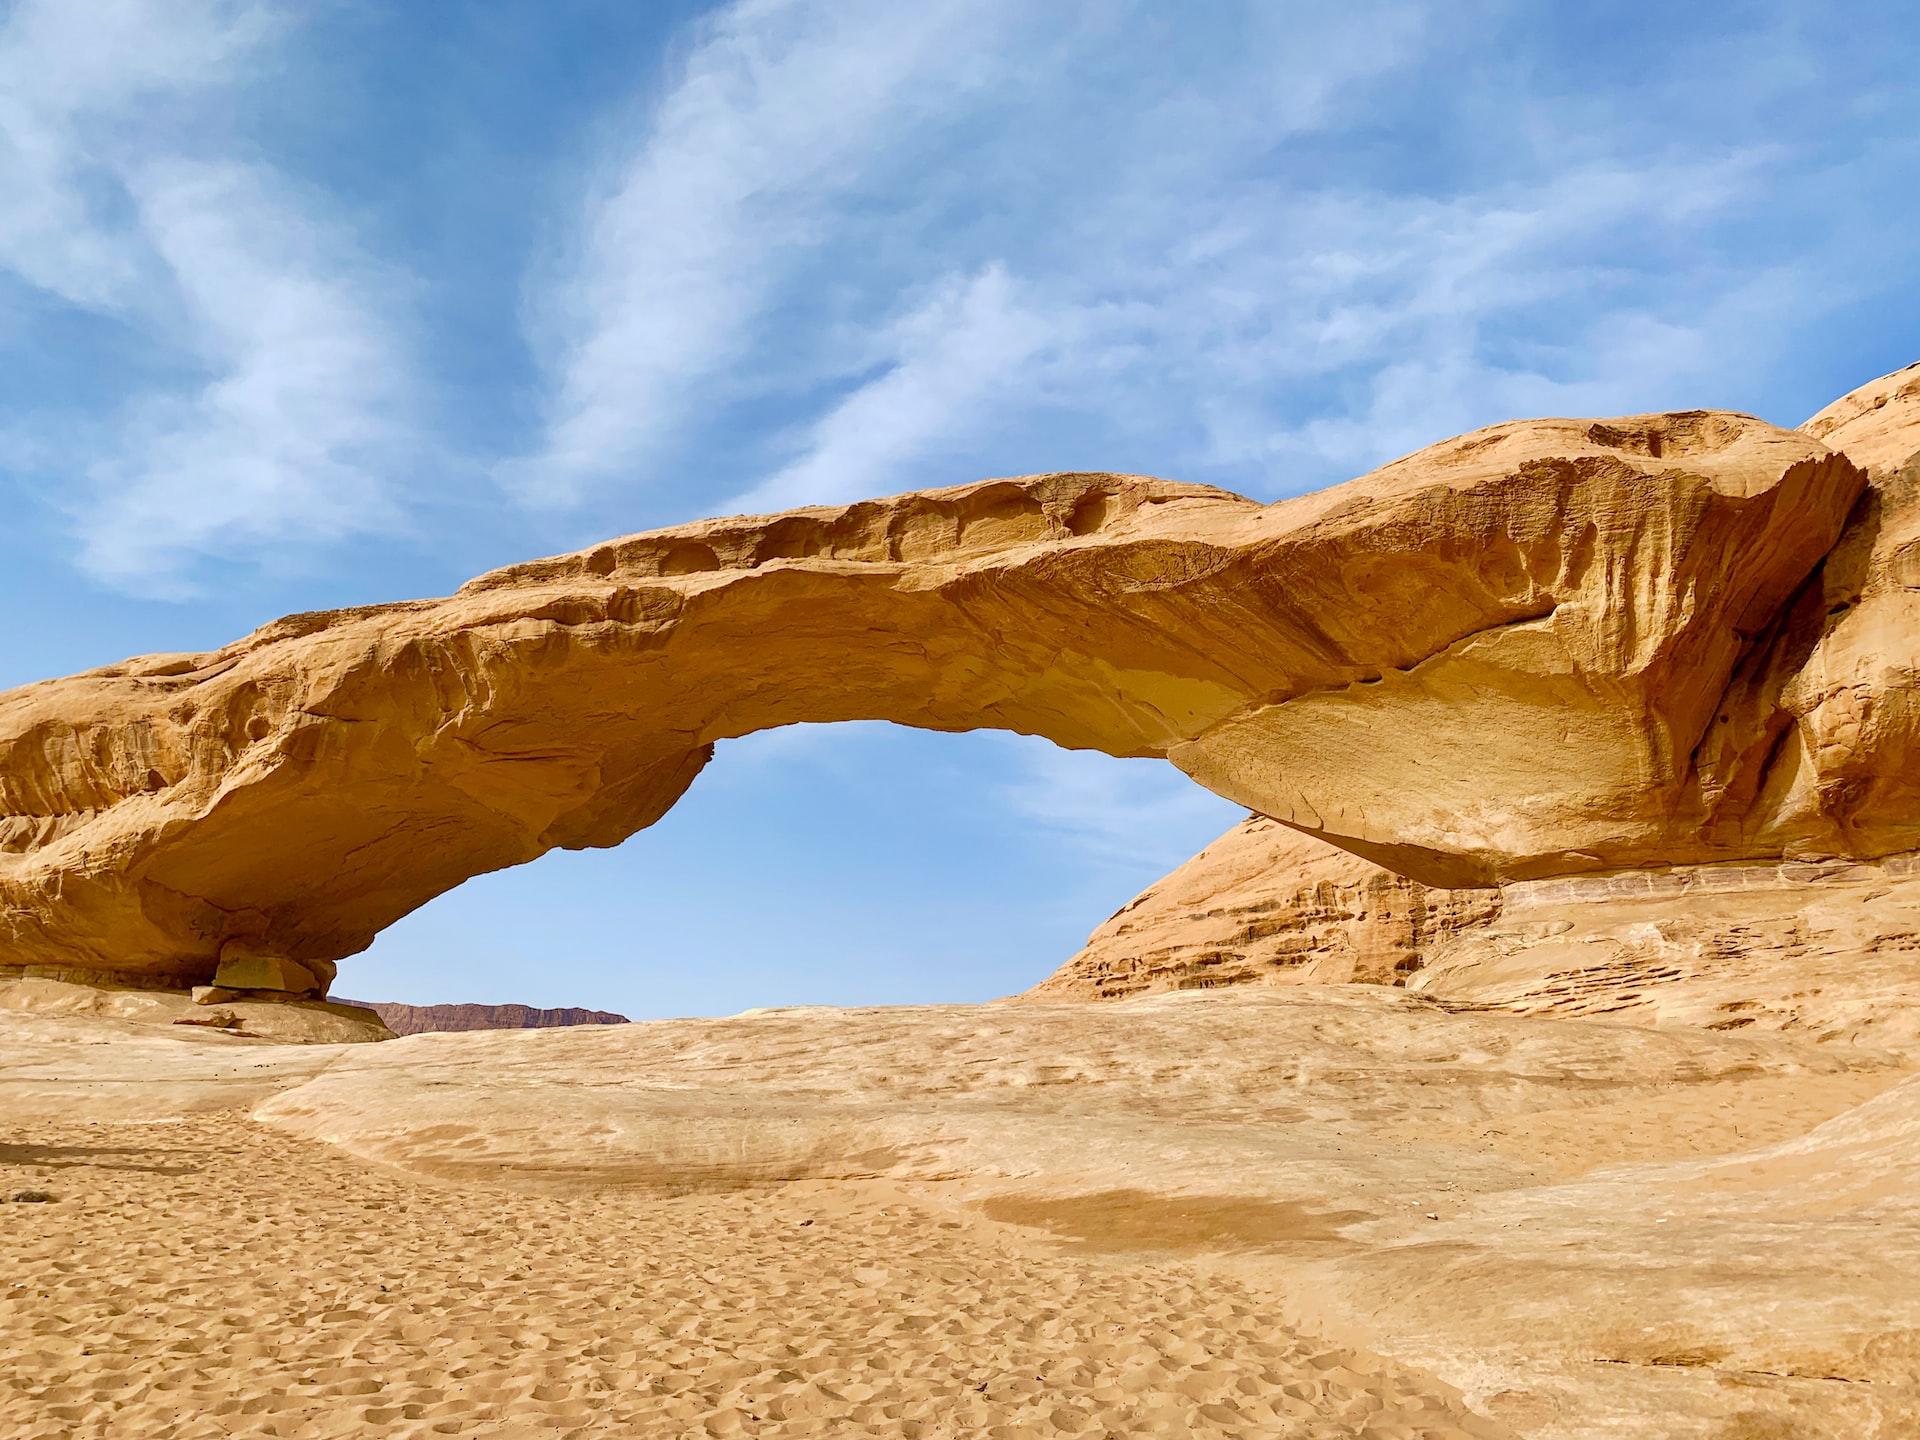 Movies Filmed in Wadi Rum-The rock bridges were just what the production needed